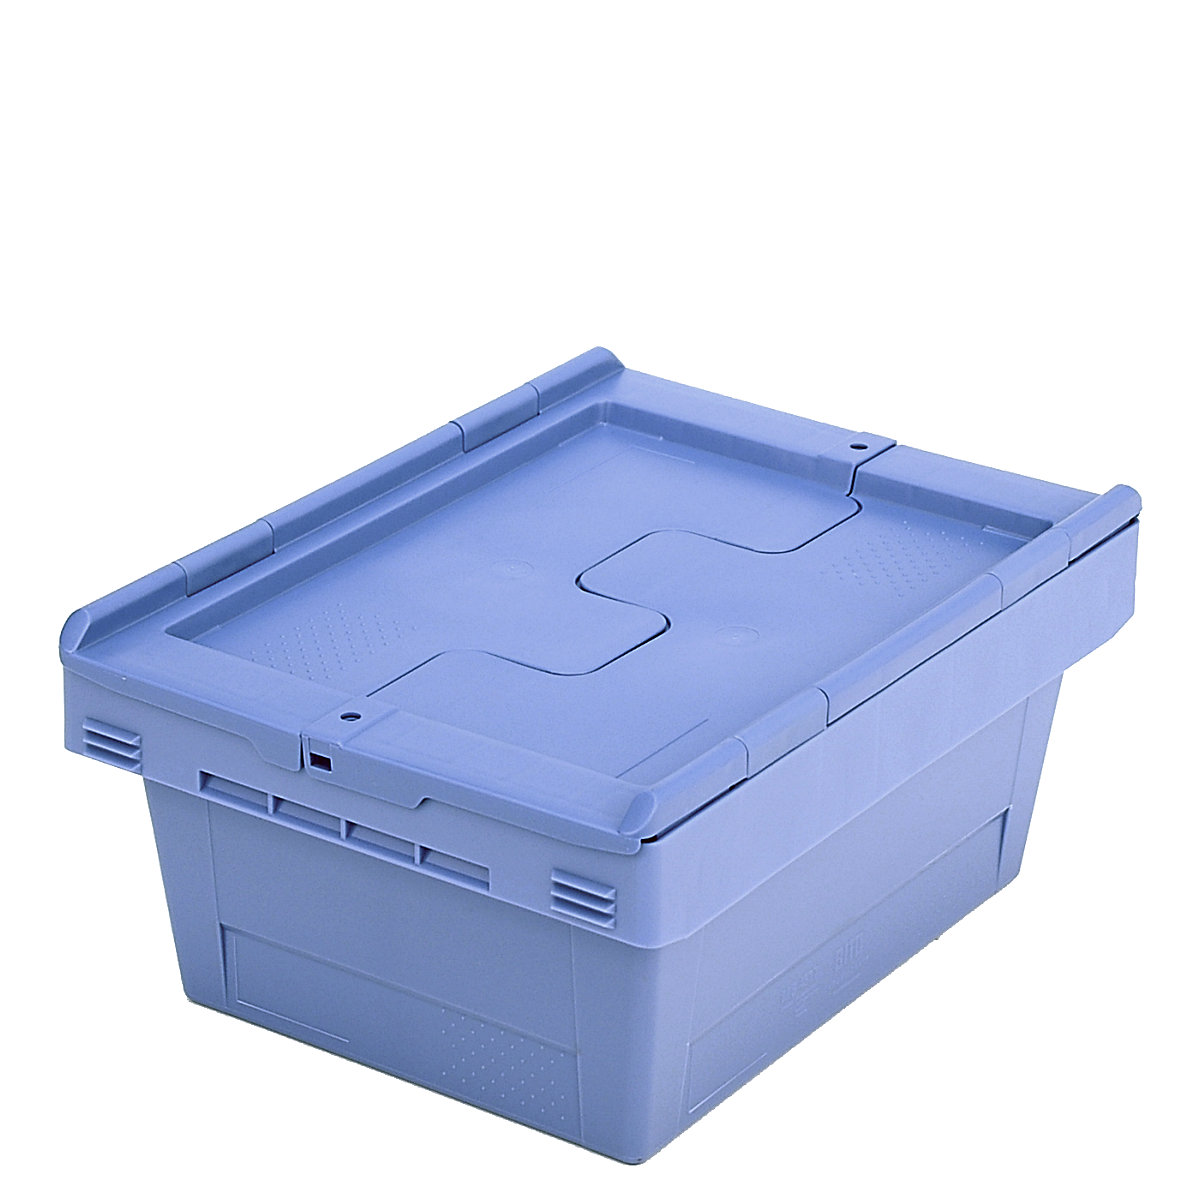 Reusable stacking container with folding lid – BITO